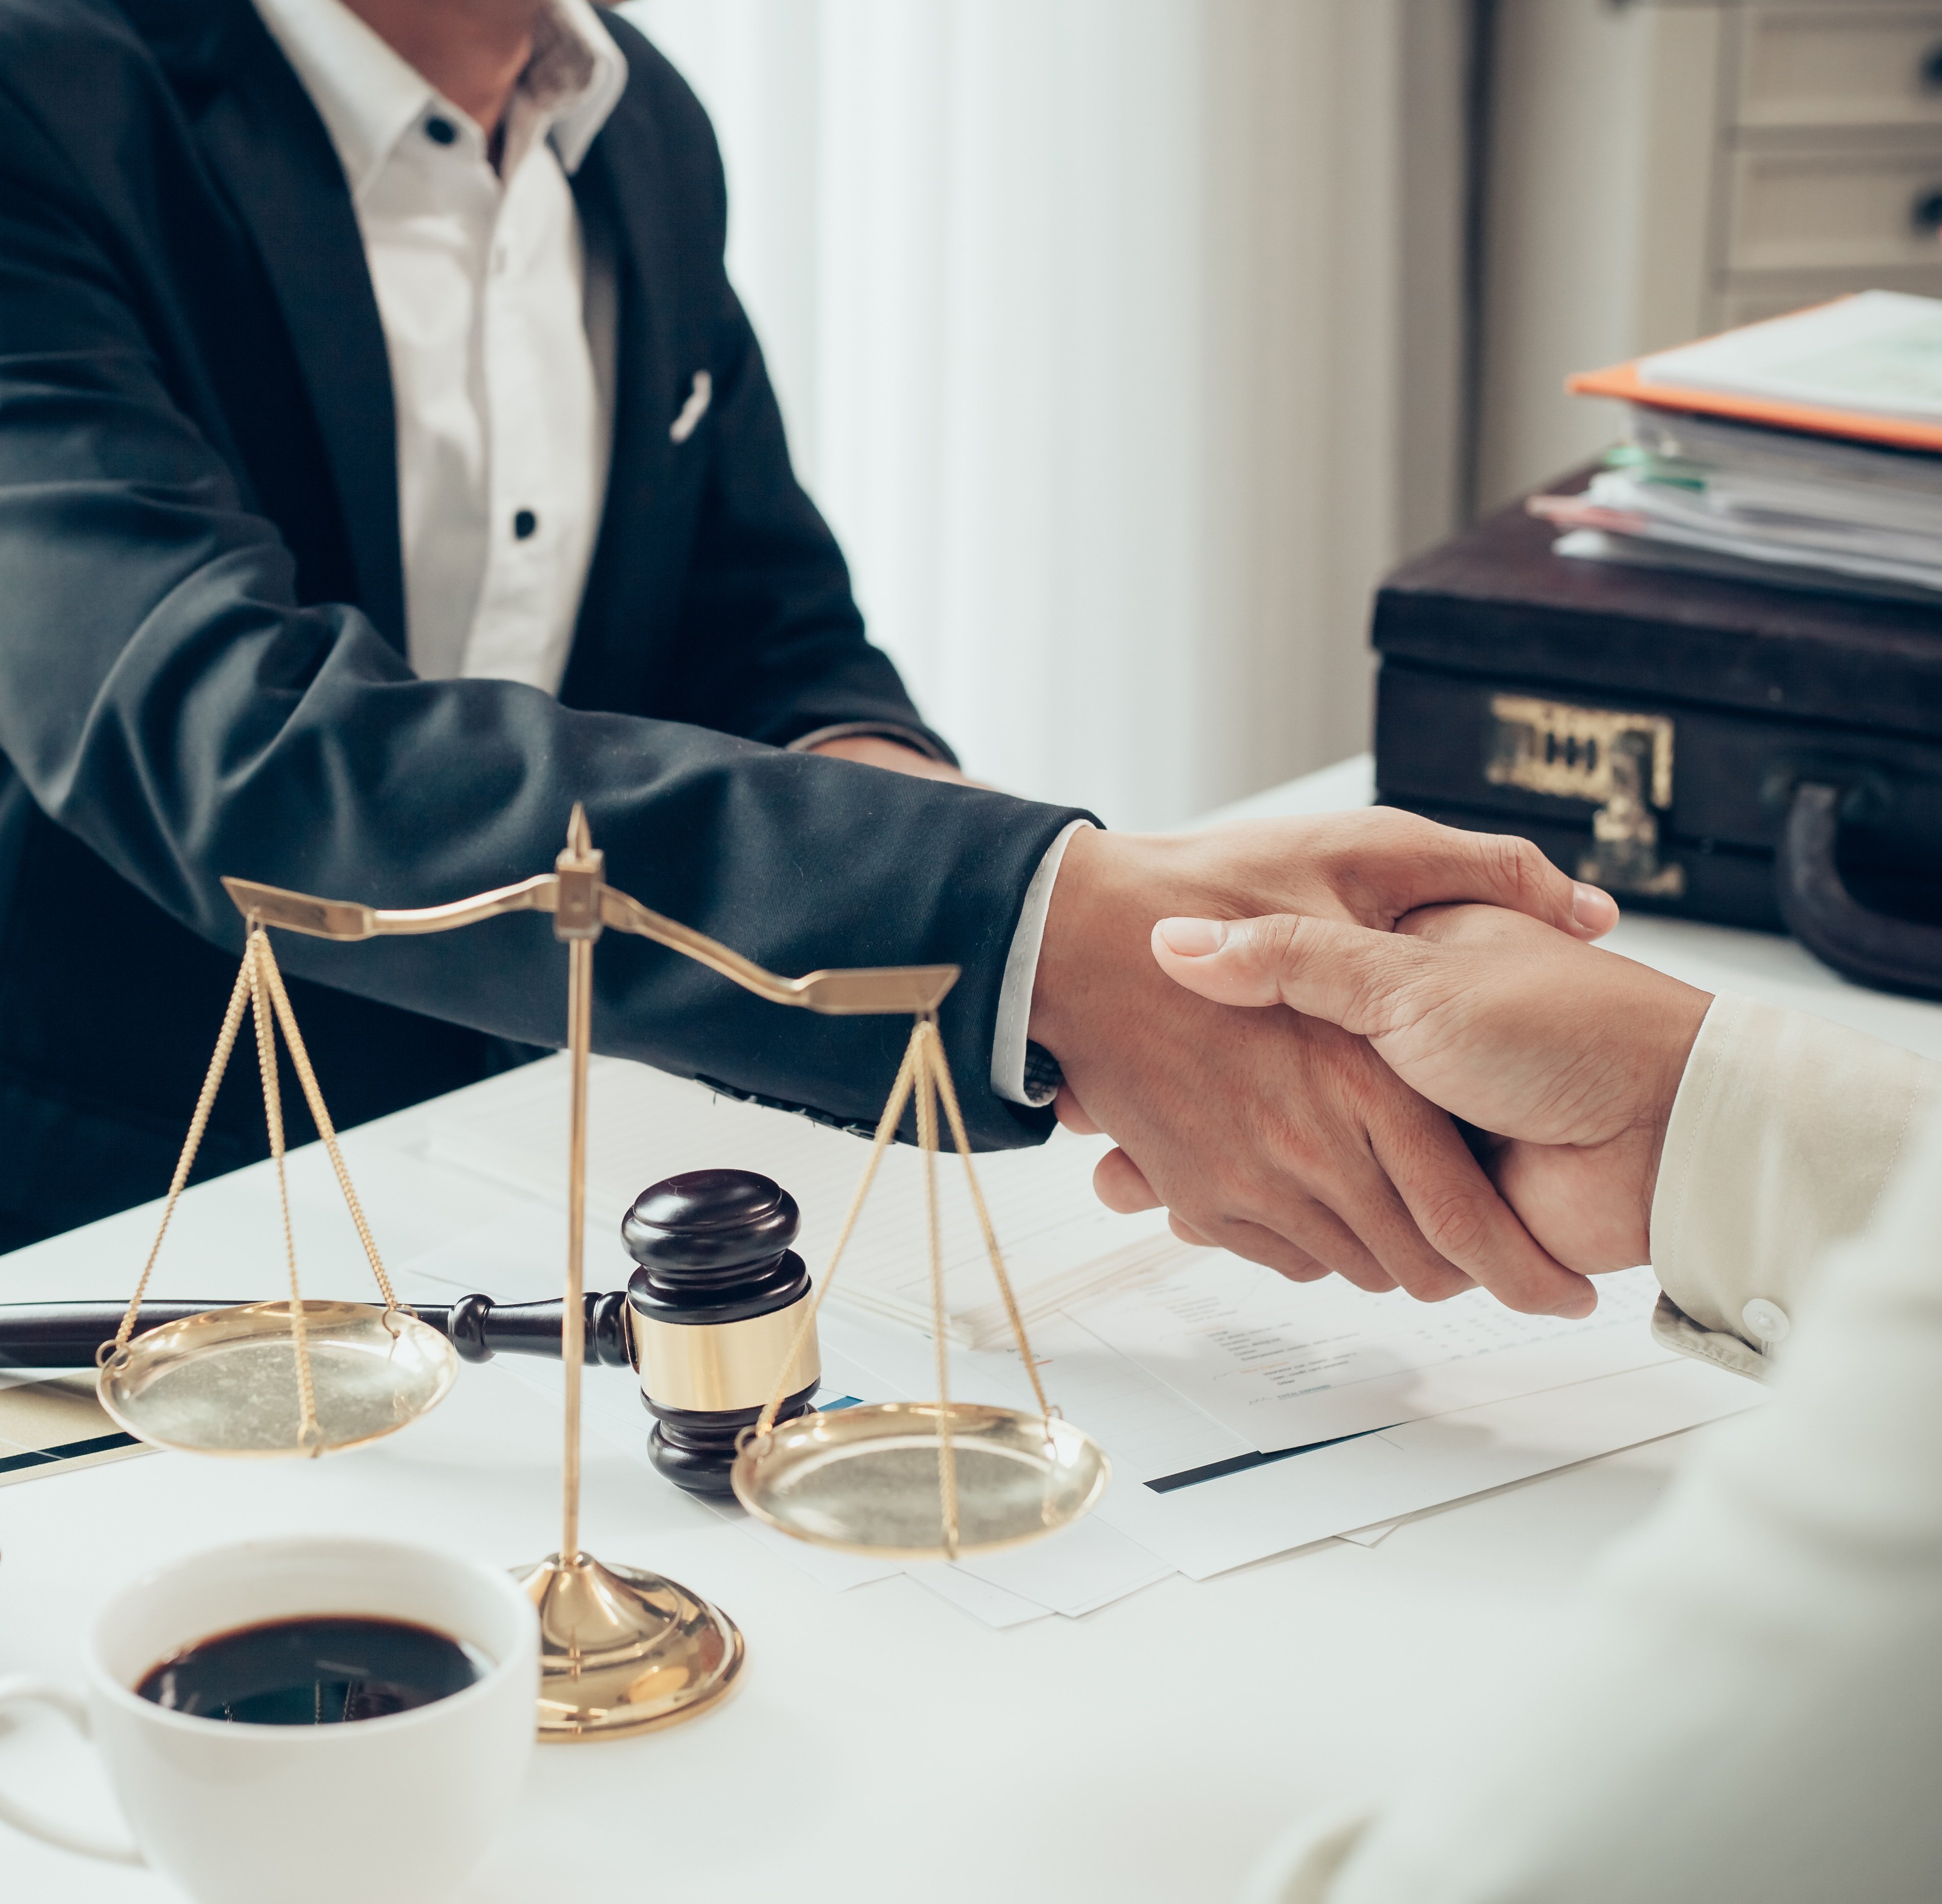 Lawyers to Help the Russian Crypto Industry Deal With Inadequate Laws